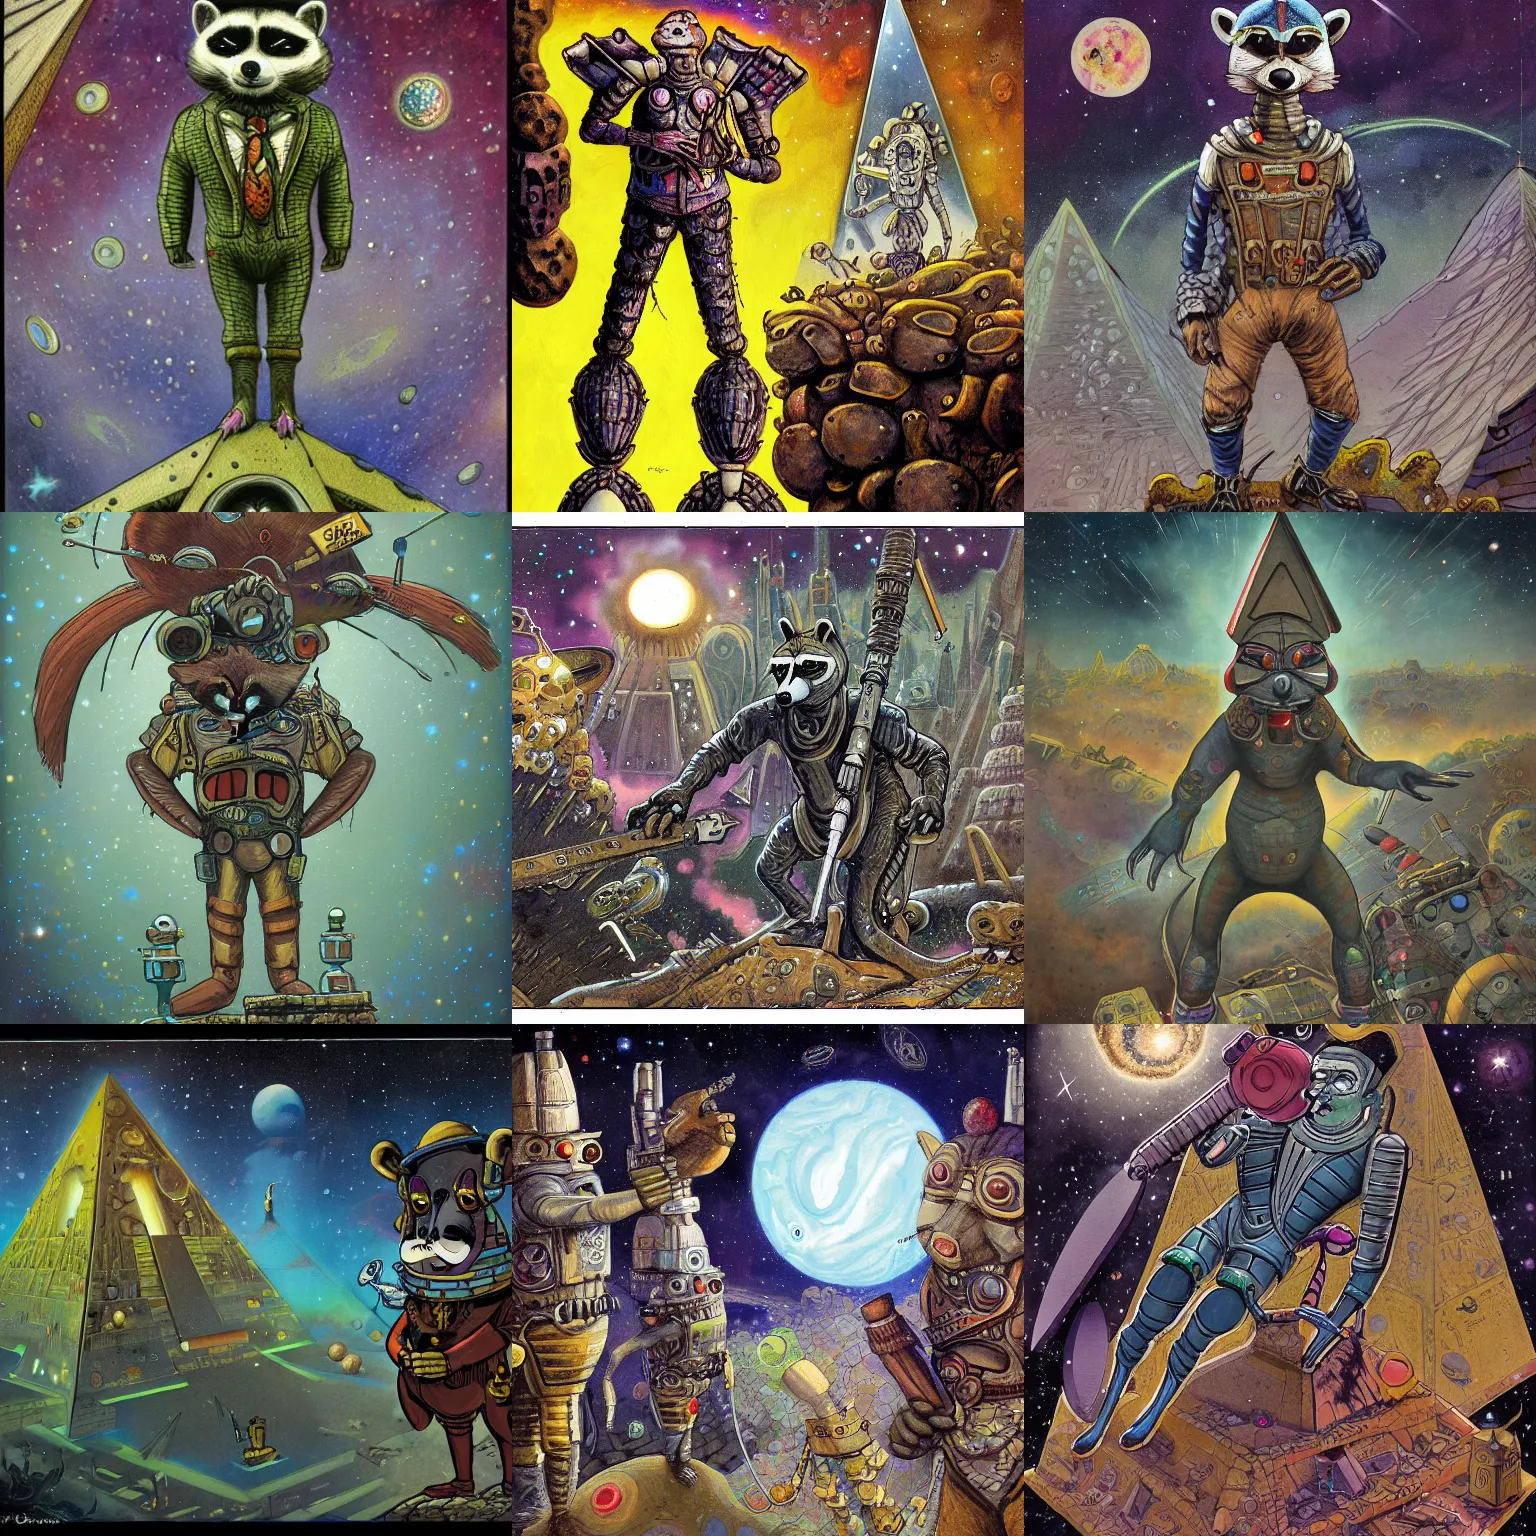 Prompt: a detailed fineart illustration of a racoon extraterrestrial wearing decopunk armor pyramids and galaxies background by george grosz and dave gibbons, j. j. grandville in the style of dark fantasy, award - winning art, artstationhd